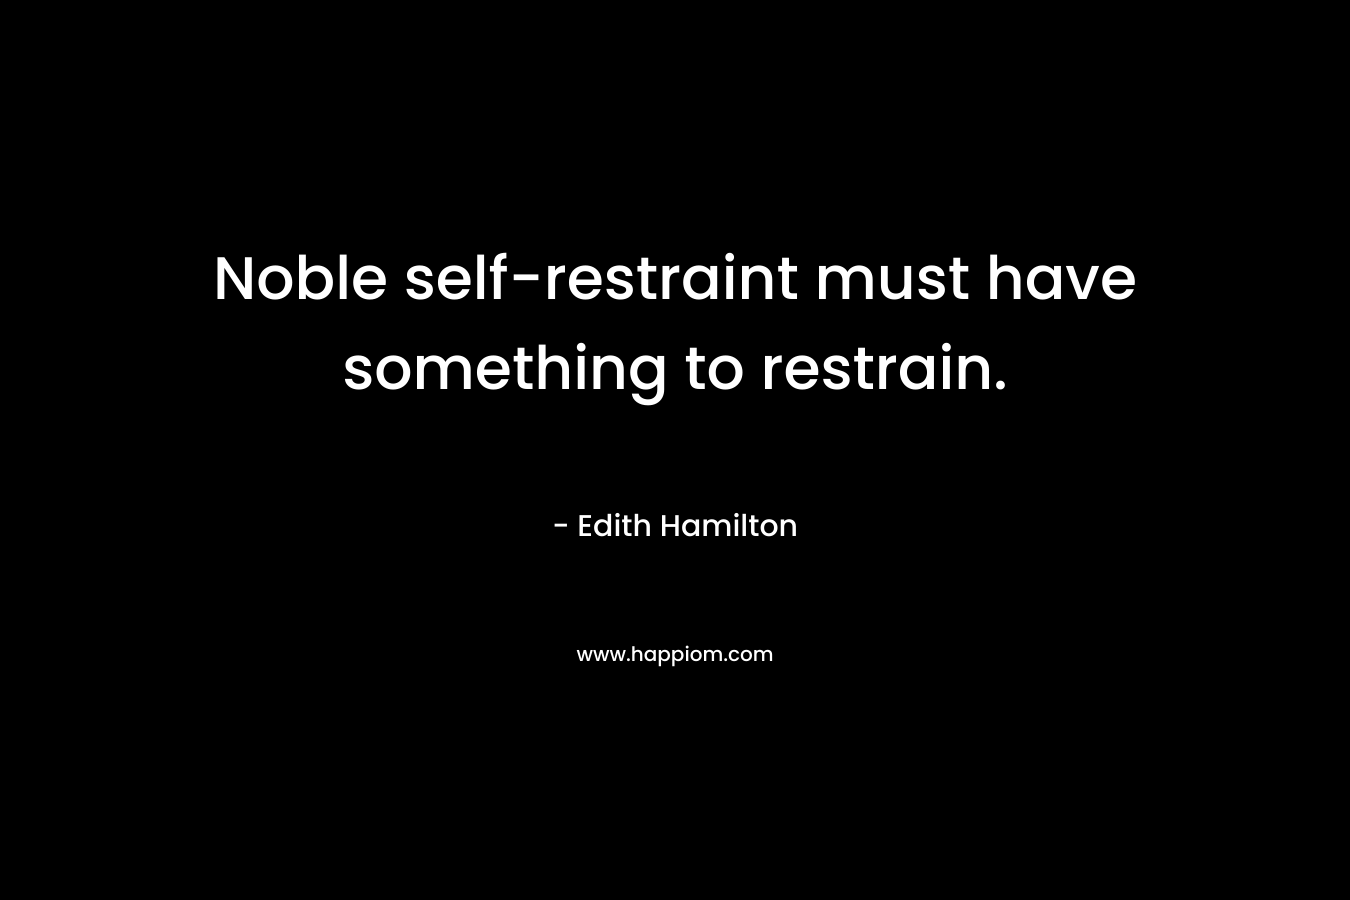 Noble self-restraint must have something to restrain. – Edith Hamilton